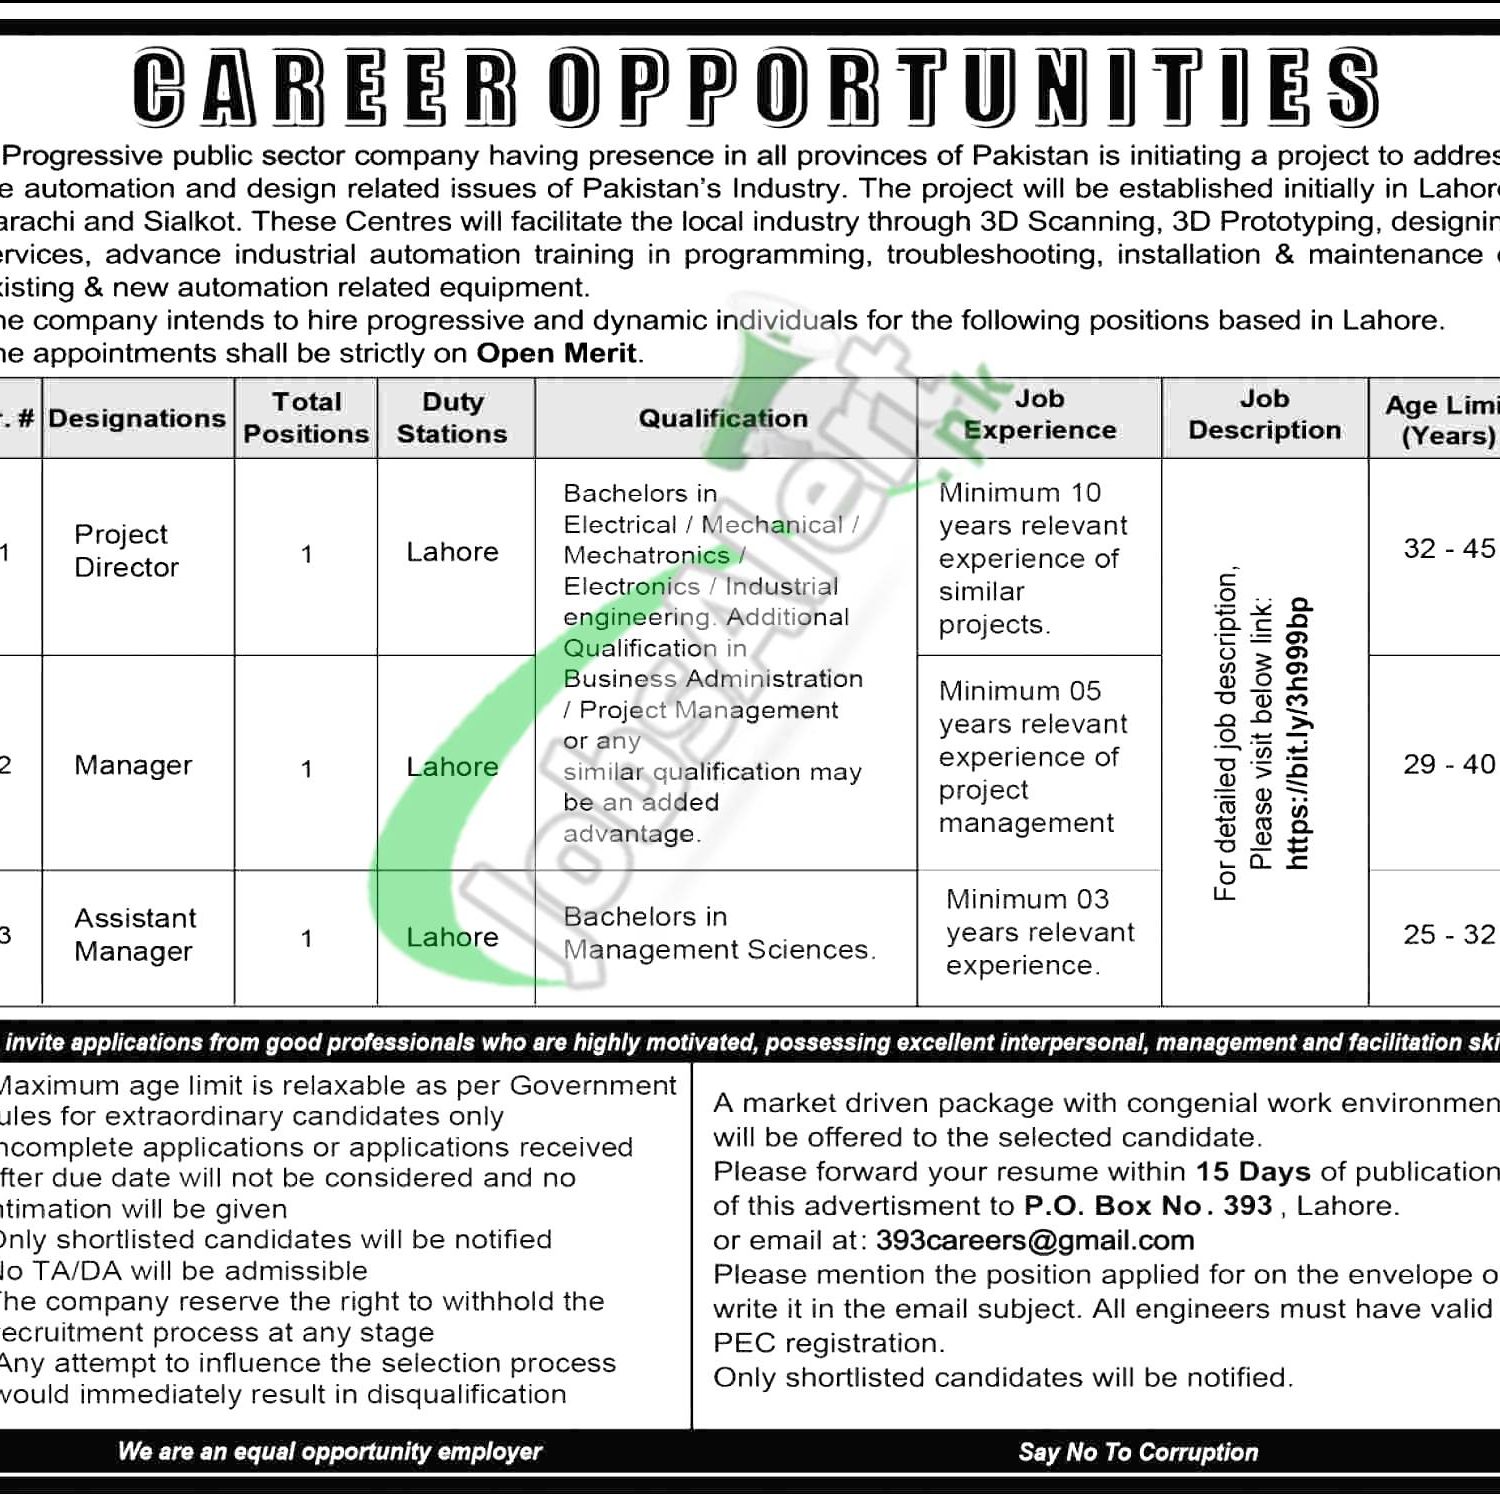 PO Box No 393 Lahore Jobs 2020 for Current Advertisement ...